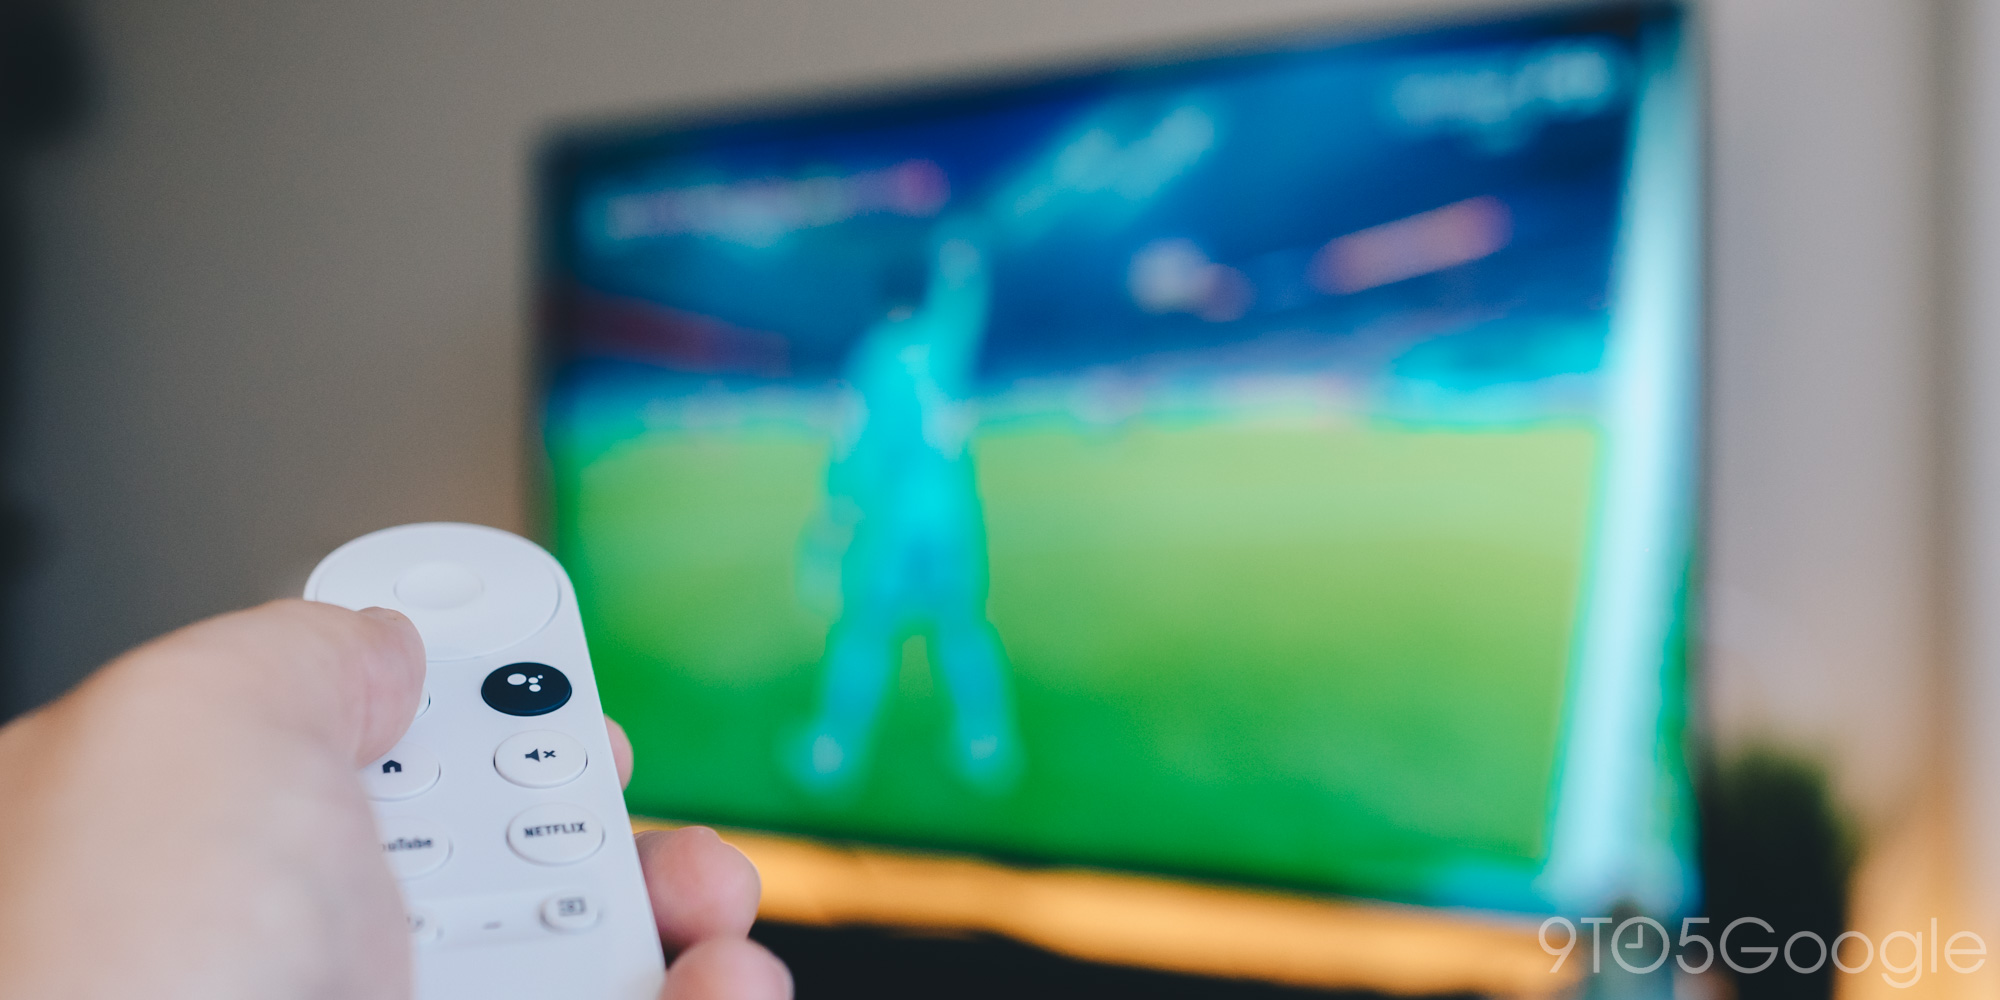 Where to watch the 2022 World Cup on Android and Google TV